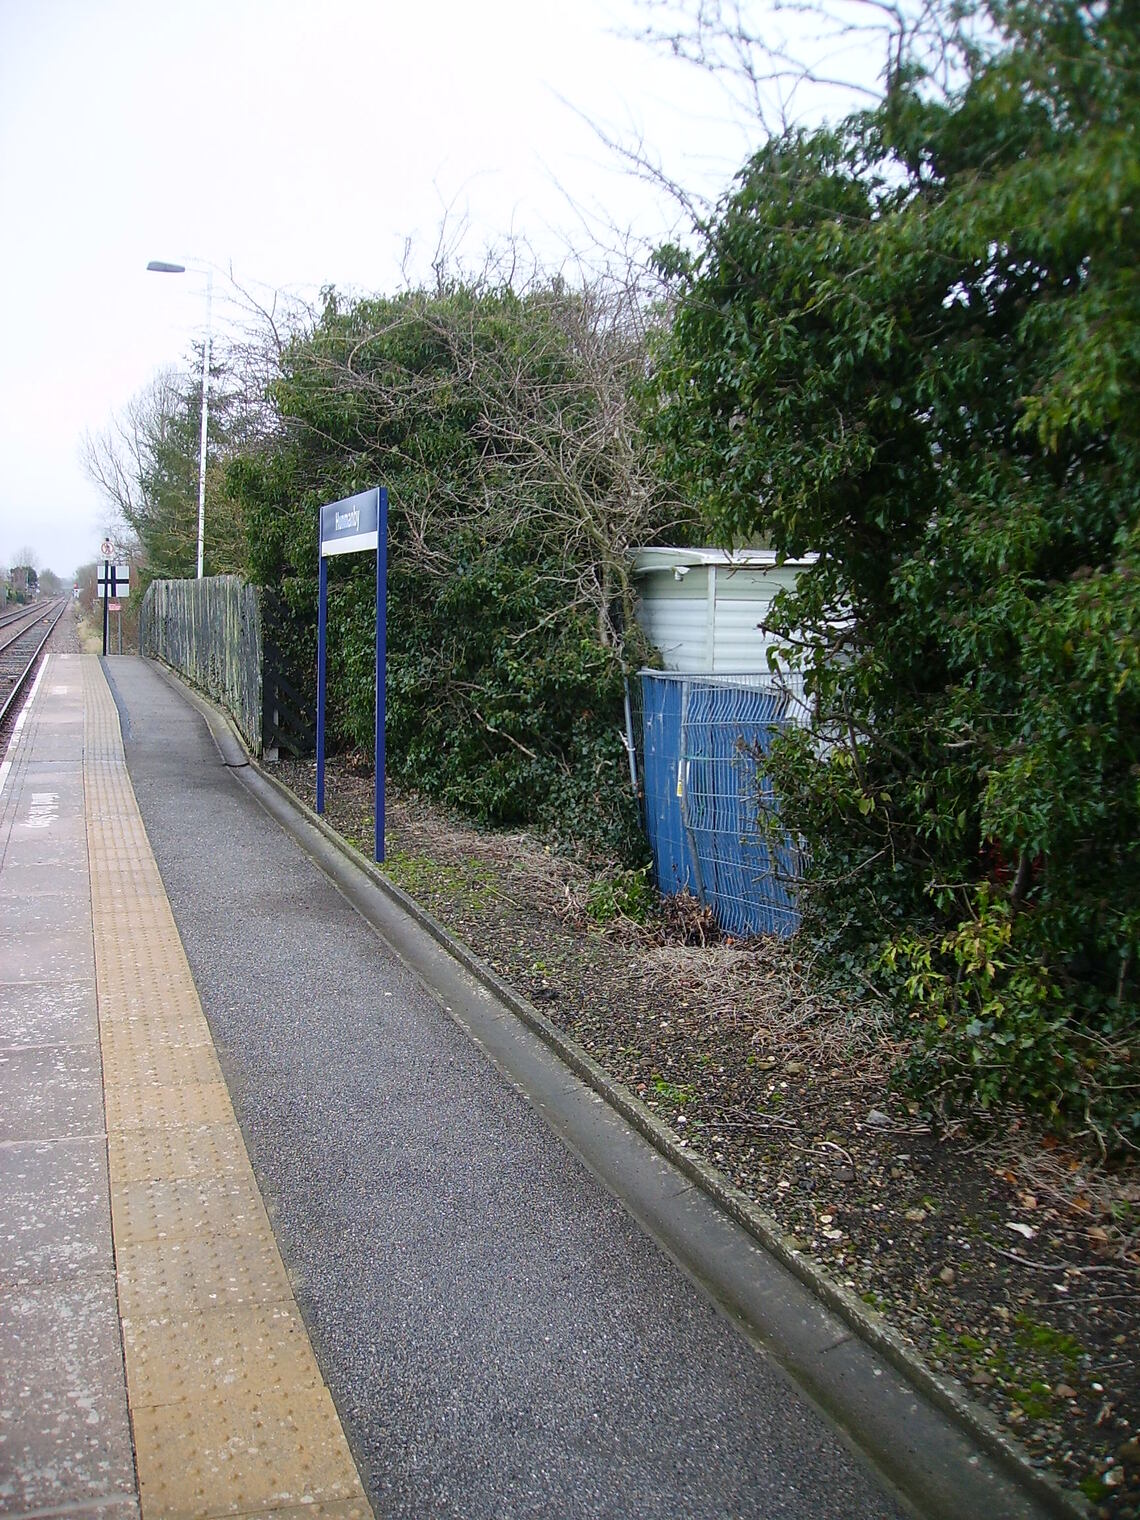 Platform 1 at Hunmanby Station before putting in a dead hedge